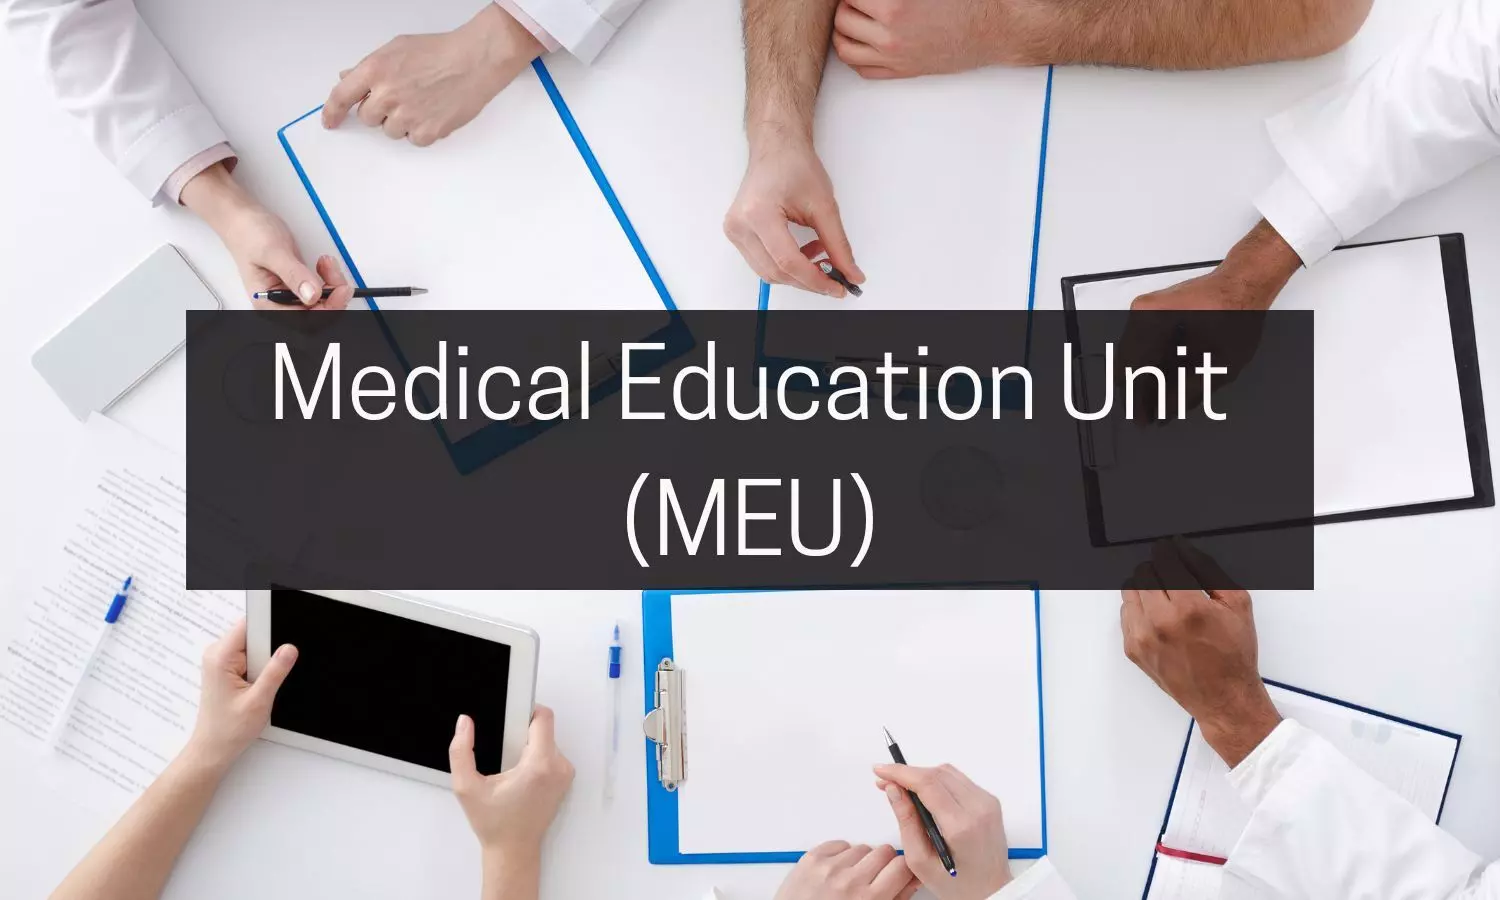 NMC Releases Revised Guidelines for Medical Education Unit, waives additional qualifications for faculty till 2024